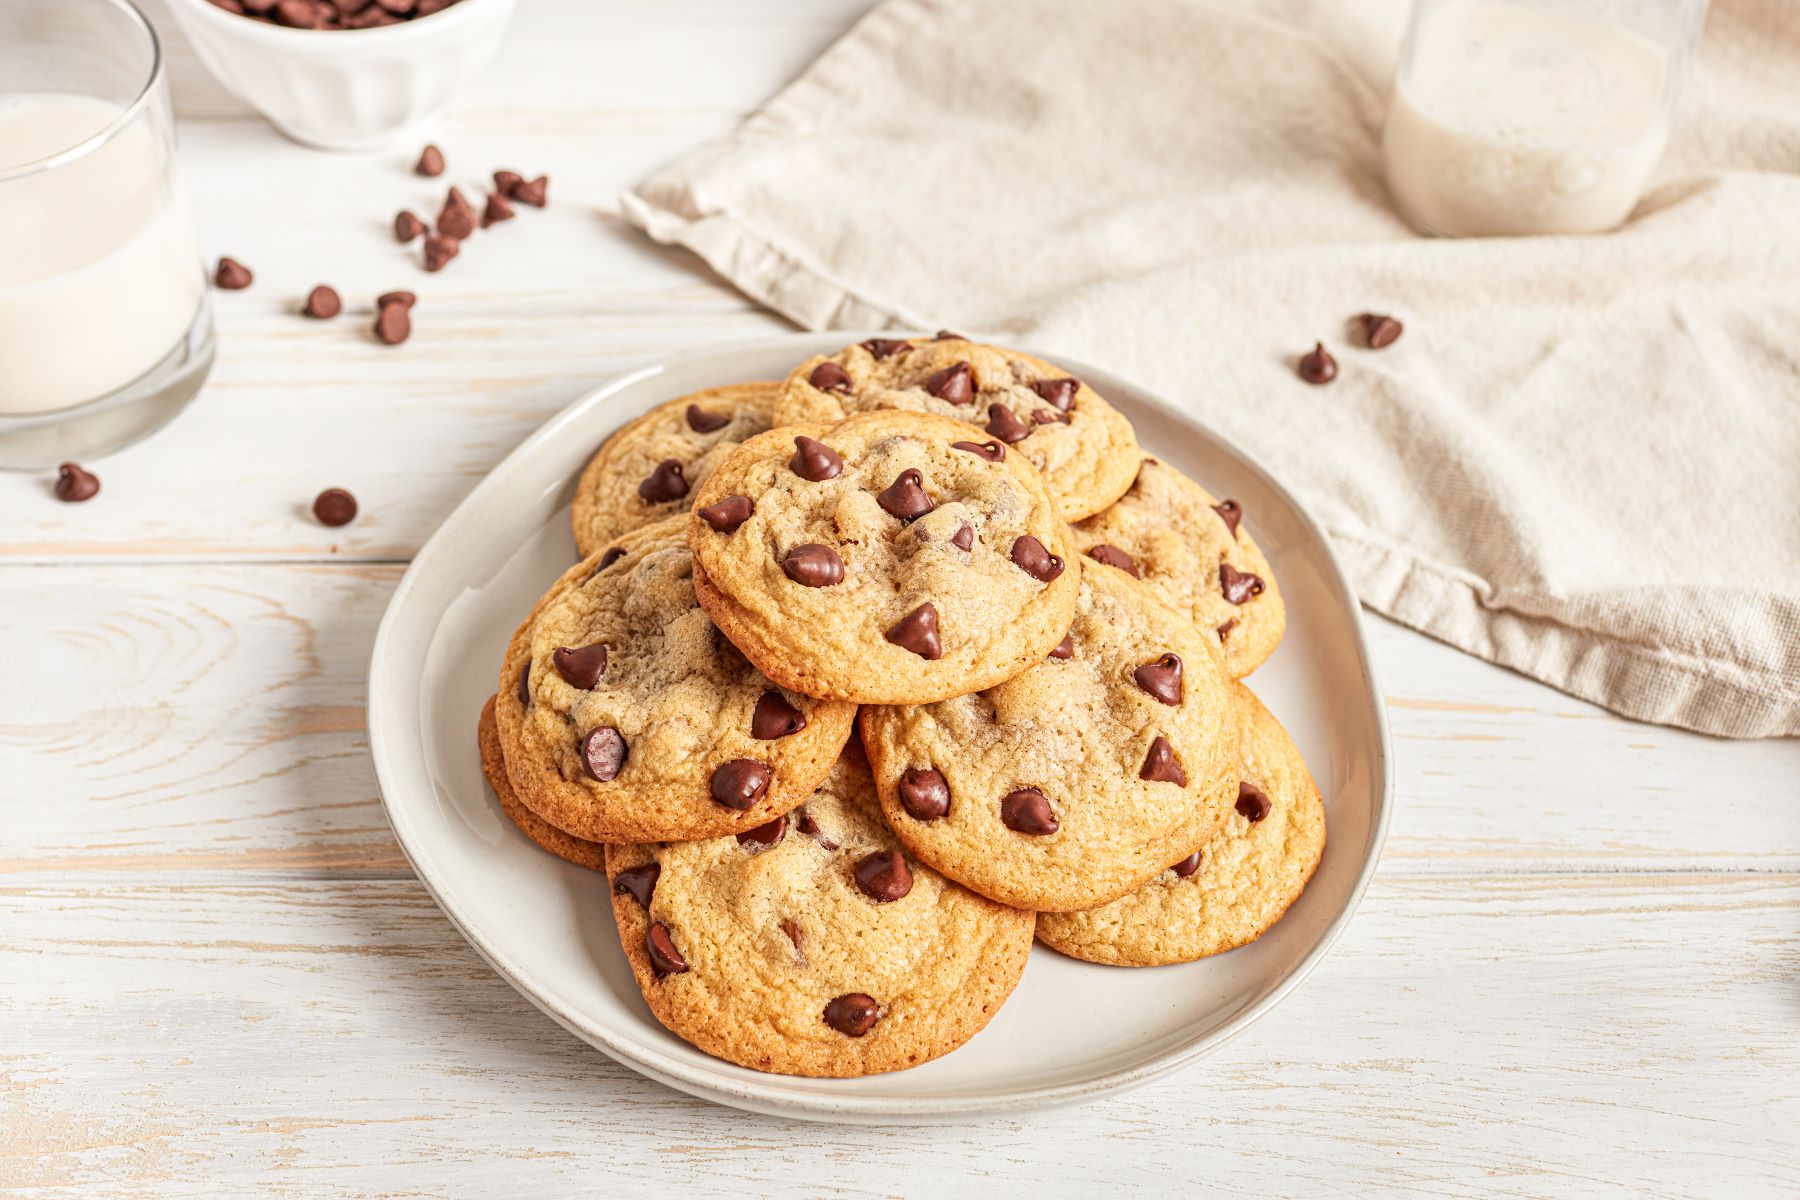 20 Nestle Chocolate Chip Cookies Nutrition Facts - Facts.net